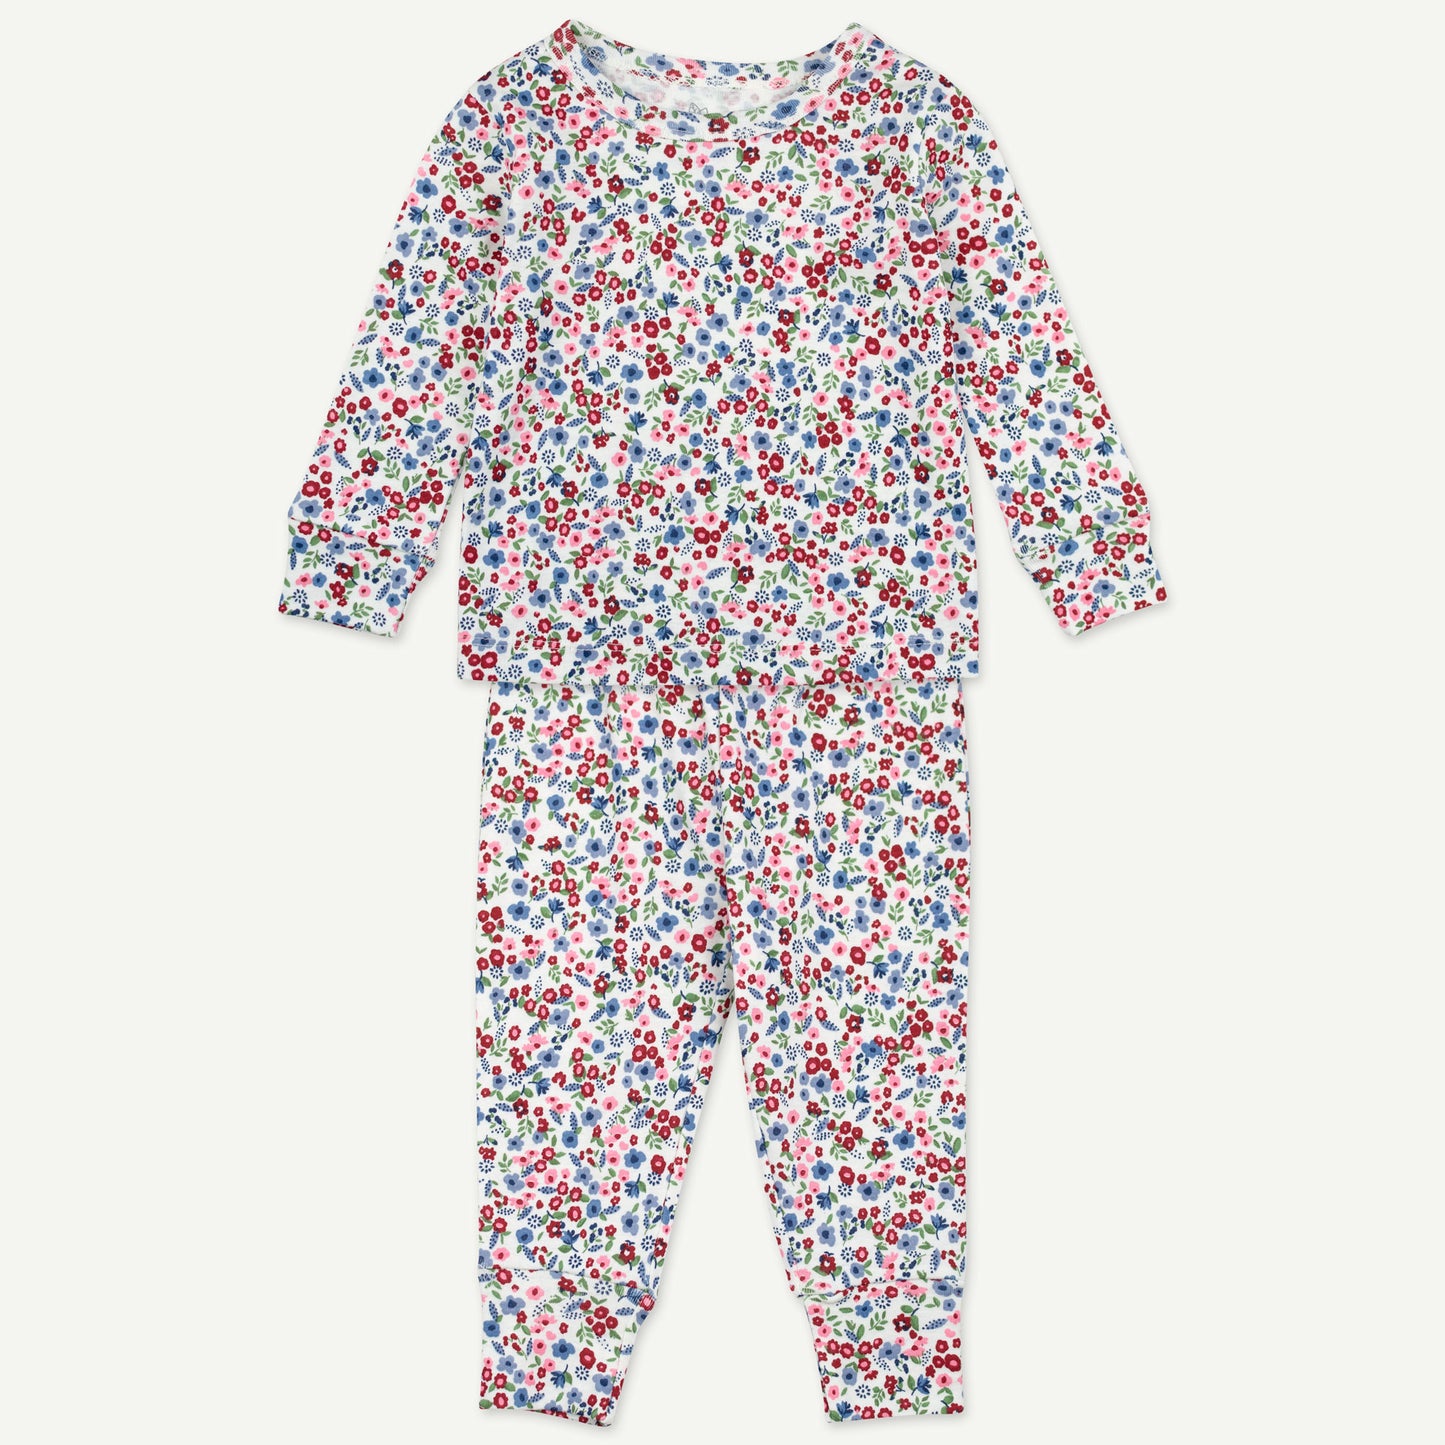 2-Piece Pajama in Ditsy Floral Print